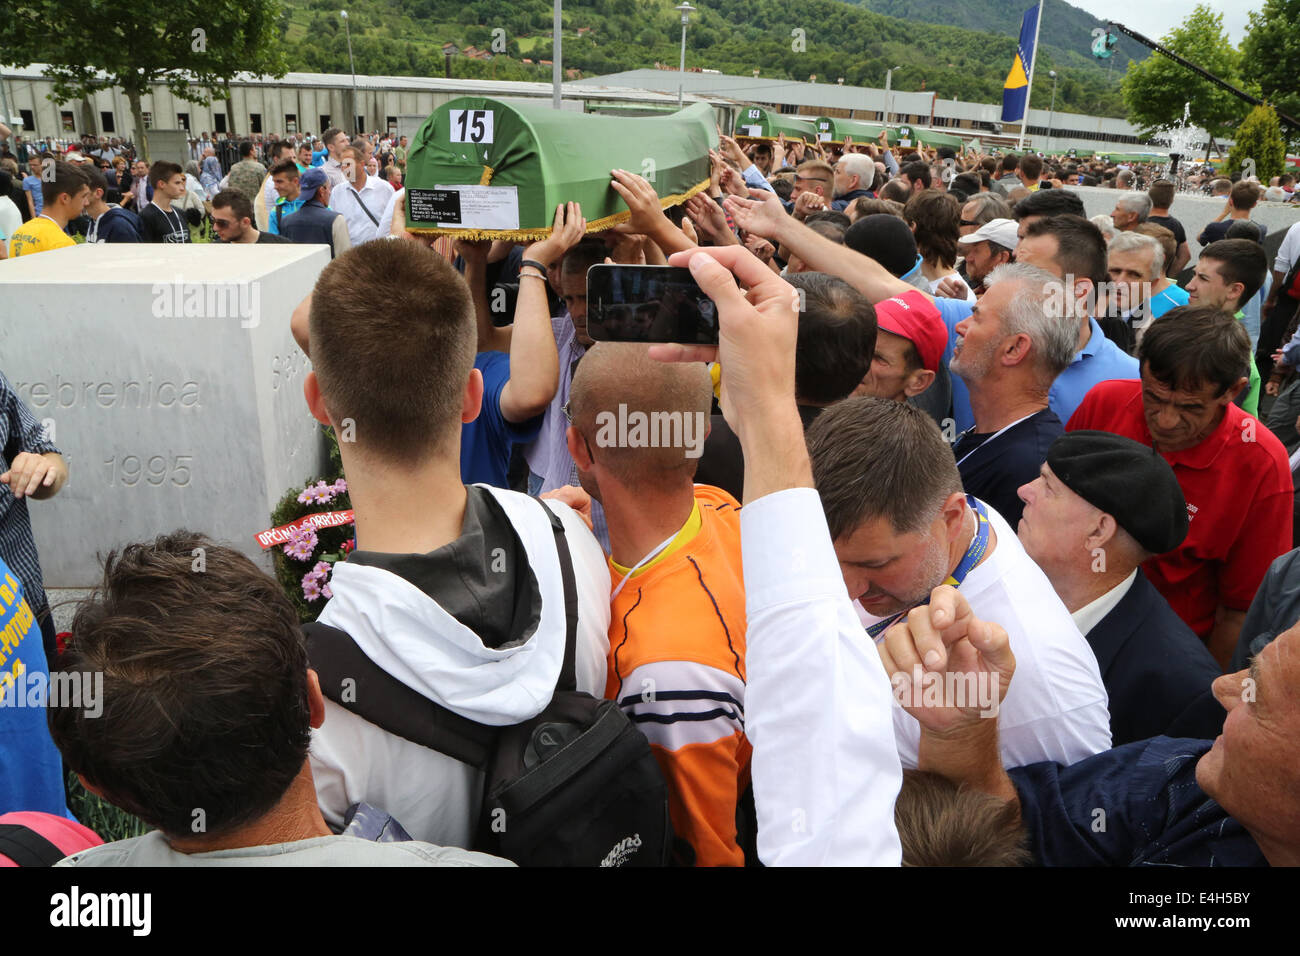 (140712) -- SREBRENICA, July 12, 2014 (Xinhua) -- People carry coffins of victims during a funeral in Potocari, near Srebrenica, Bosnia and Herzegovina, July 11, 2014. The funeral of 175 recently identified victims was held here Friday to commemorate the 19th anniversary of the Srebrenica massacre. Some 7,000 Muslim men and boys were massacred in and near Srebrenica by Bosnian Serb forces in July 1995, the worst massacre in Europe since the end of World War II. (Xinhua/Haris Memija) (zjl) Stock Photo